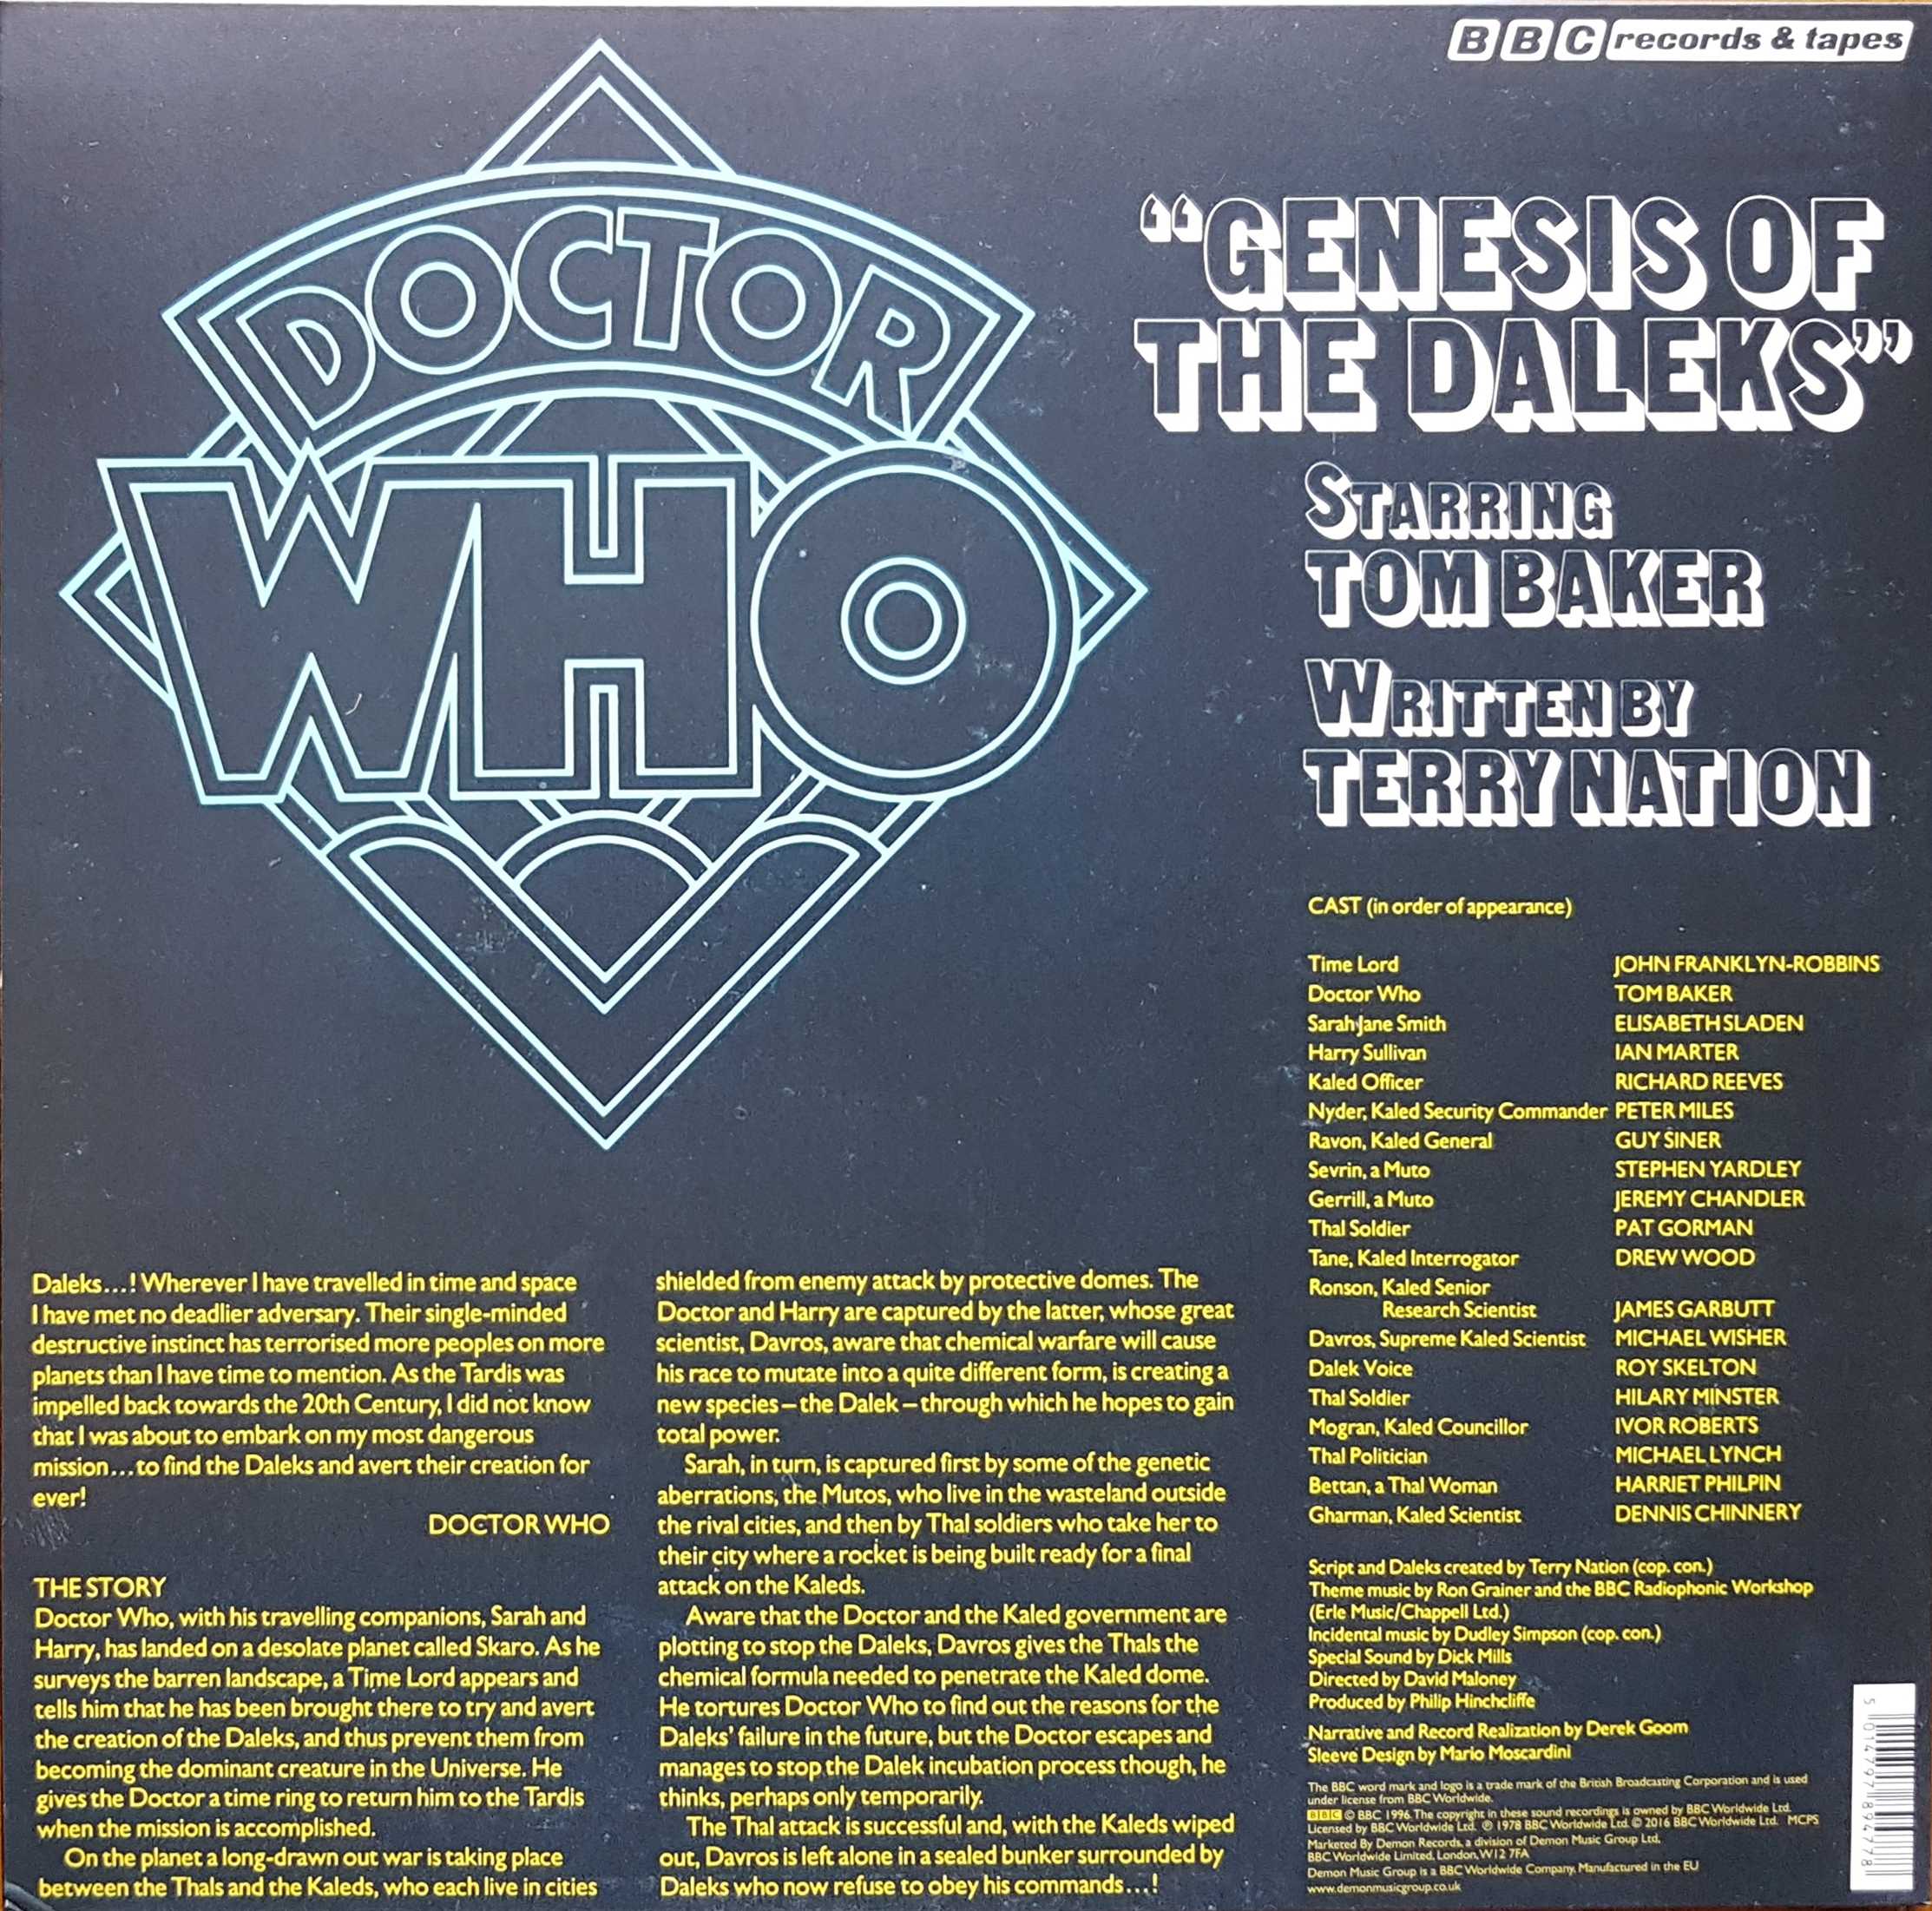 Picture of DEMREC 160 Doctor Who - Genesis of the Daleks - Record Store Day 2016 by artist Terry Nation from the BBC records and Tapes library